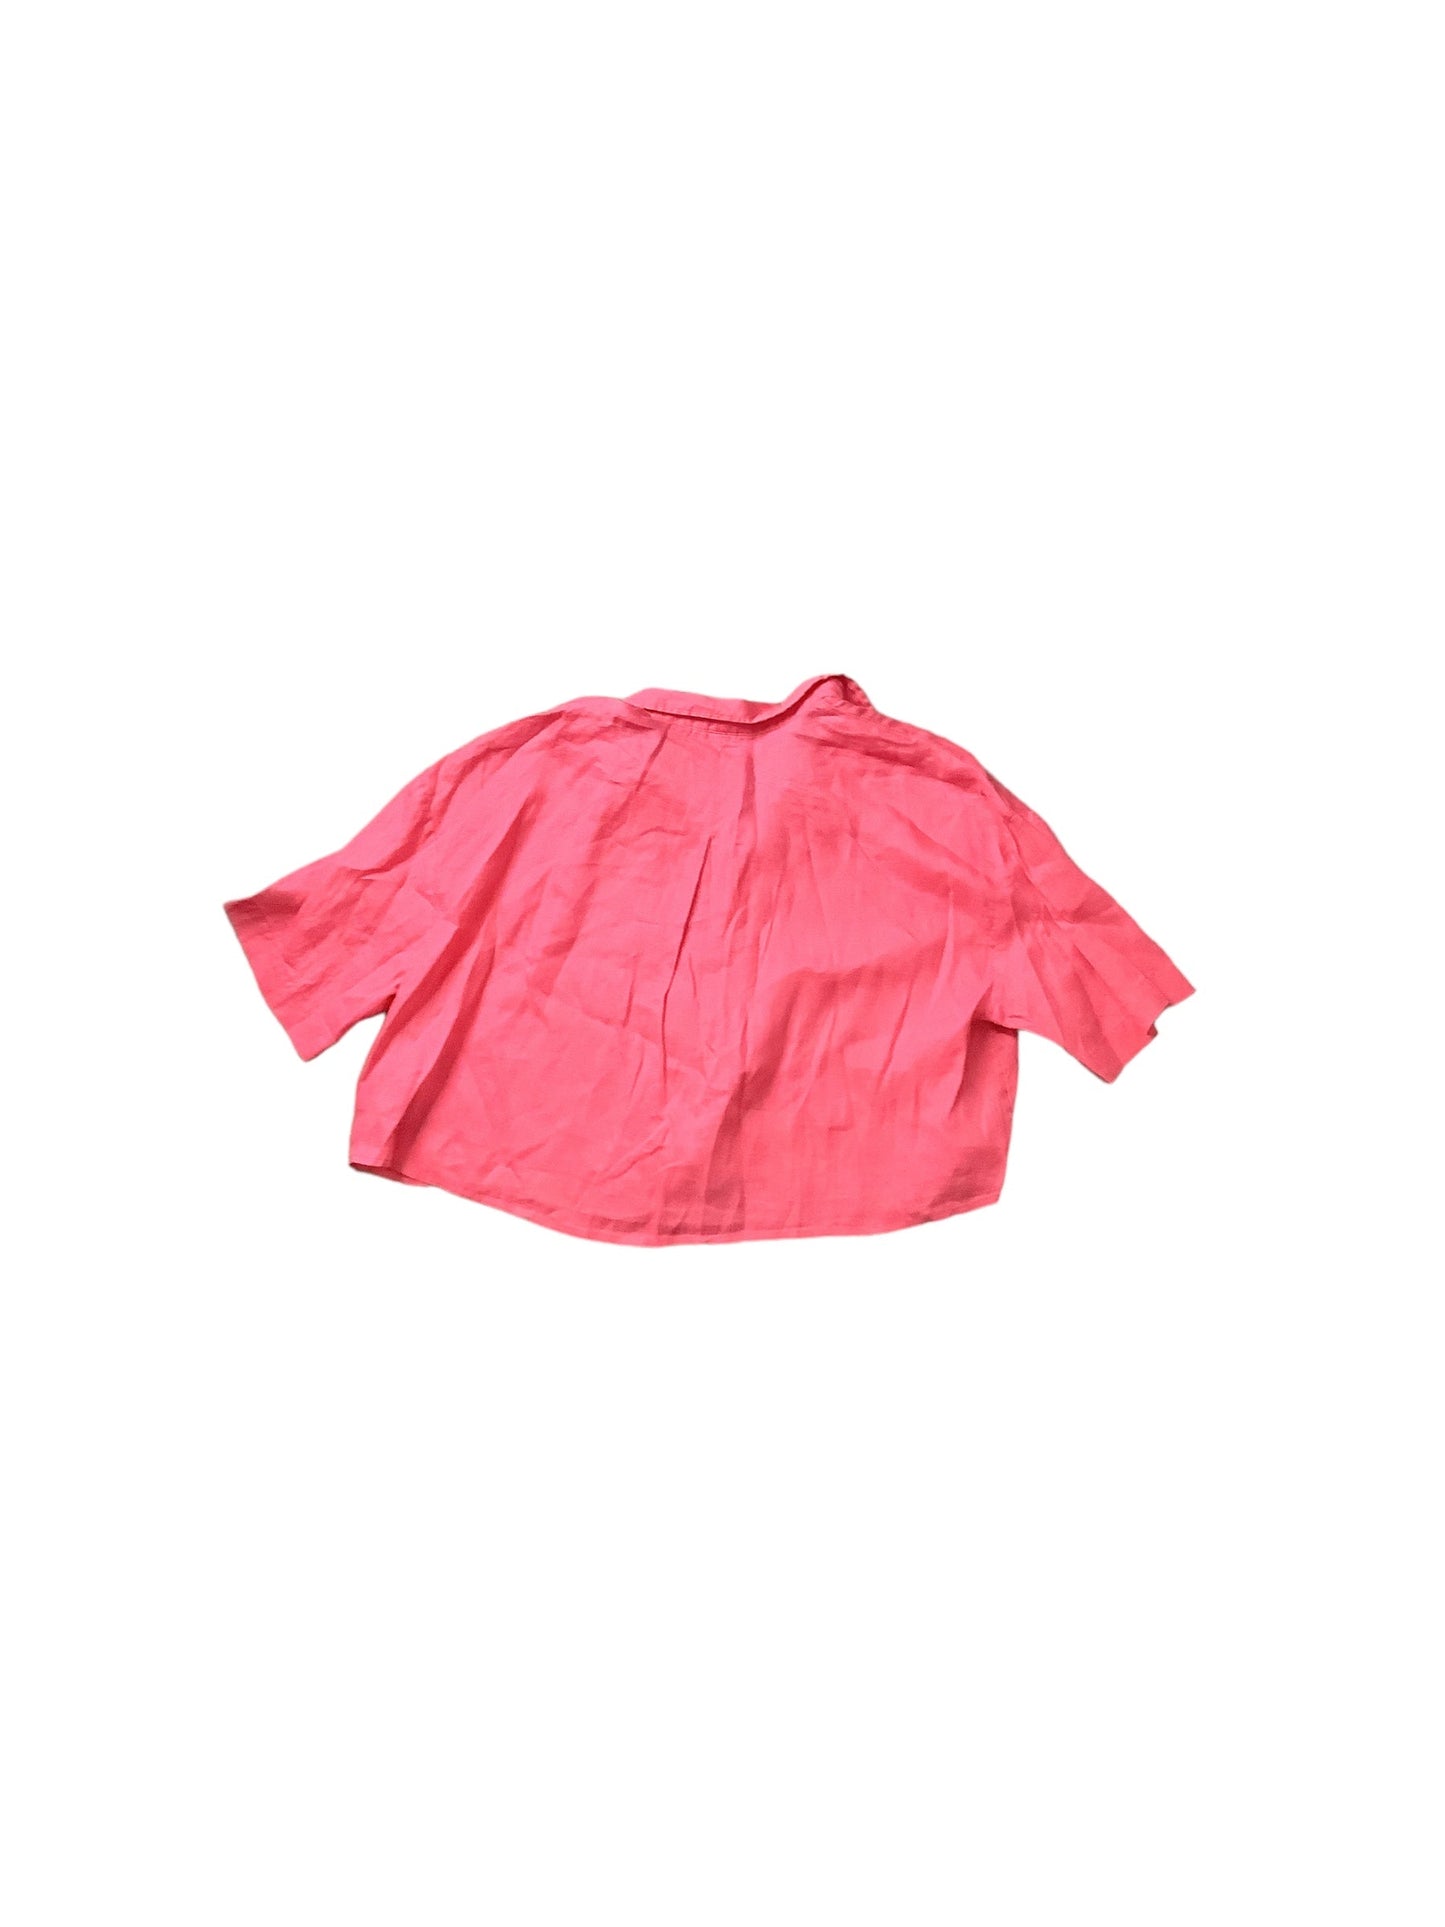 Pink Top Short Sleeve Basic H&m, Size L